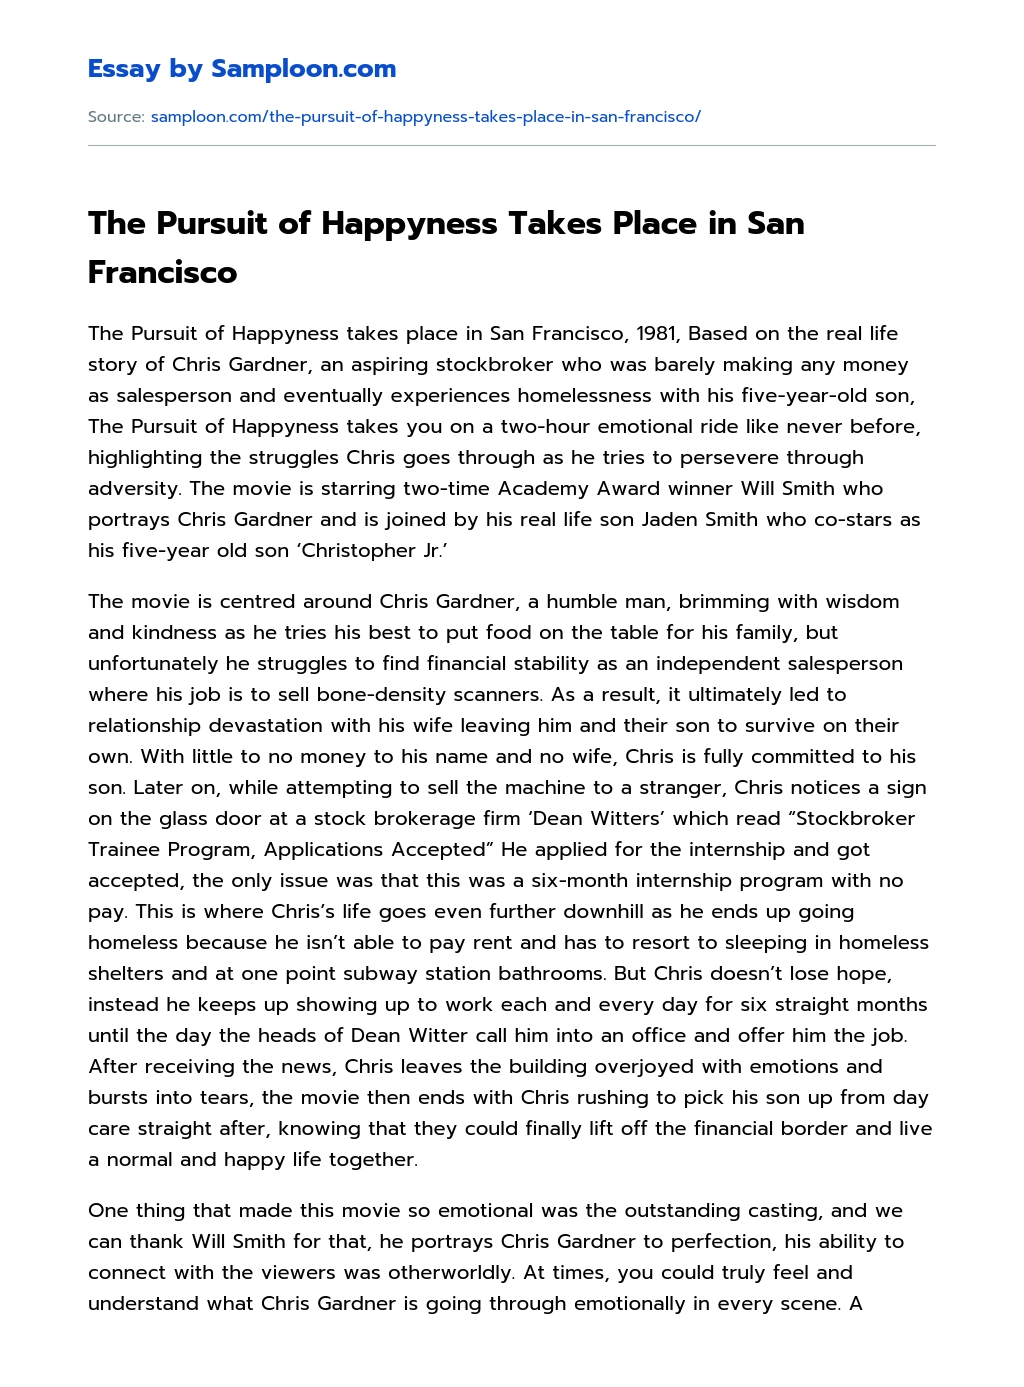 The Pursuit of Happyness Takes Place in San Francisco Review essay